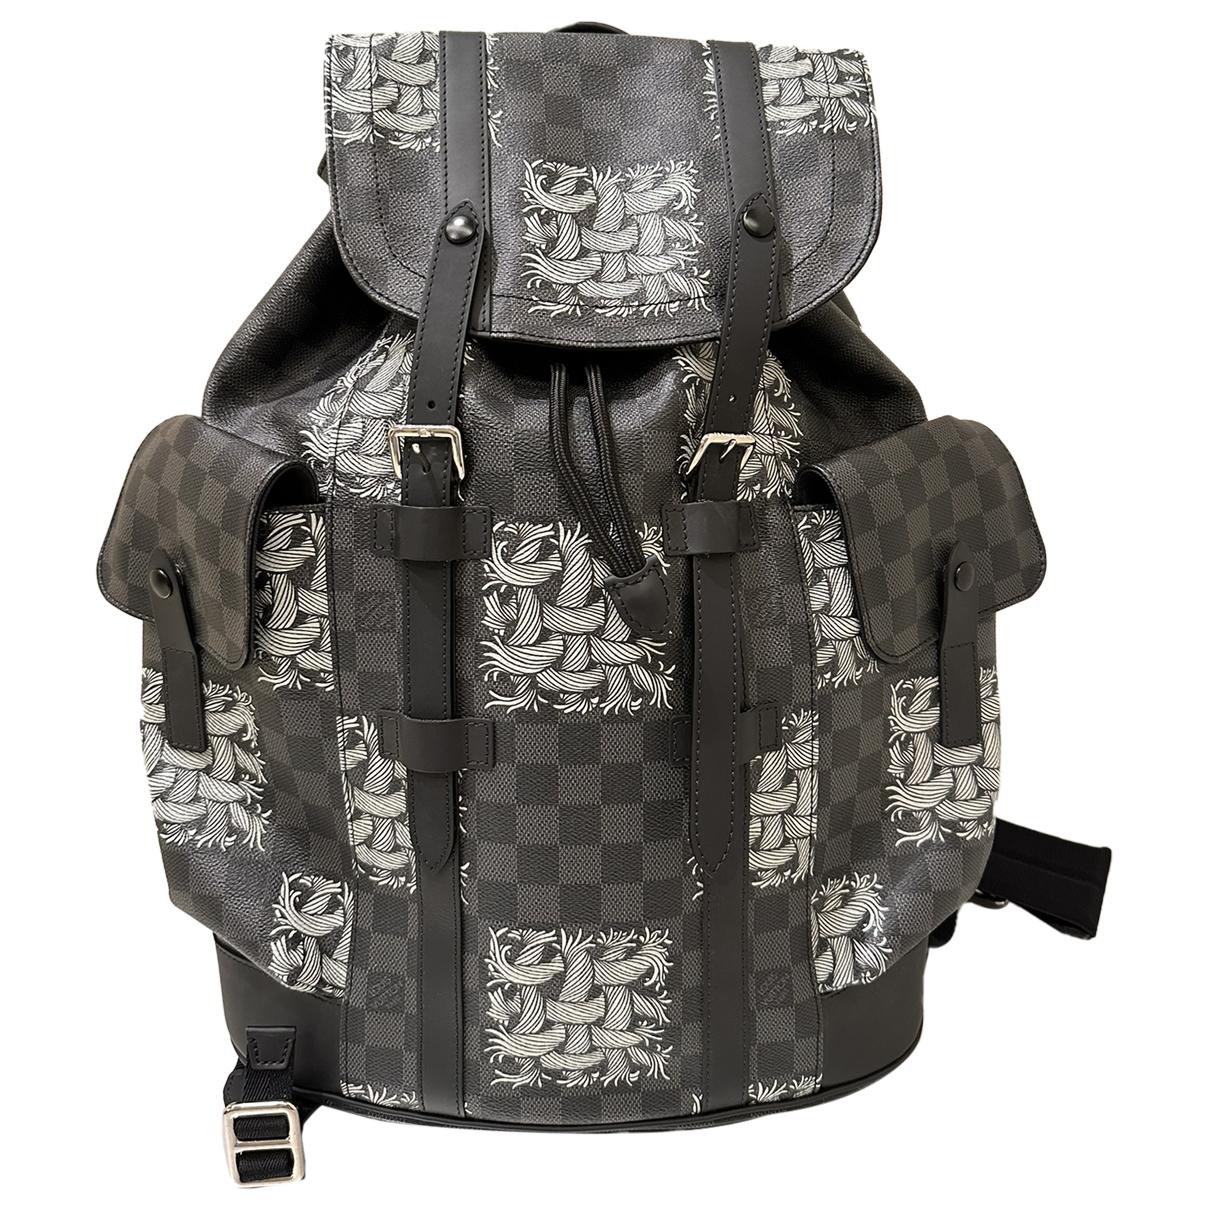 Christopher backpack leather bag Louis Vuitton Multicolour in